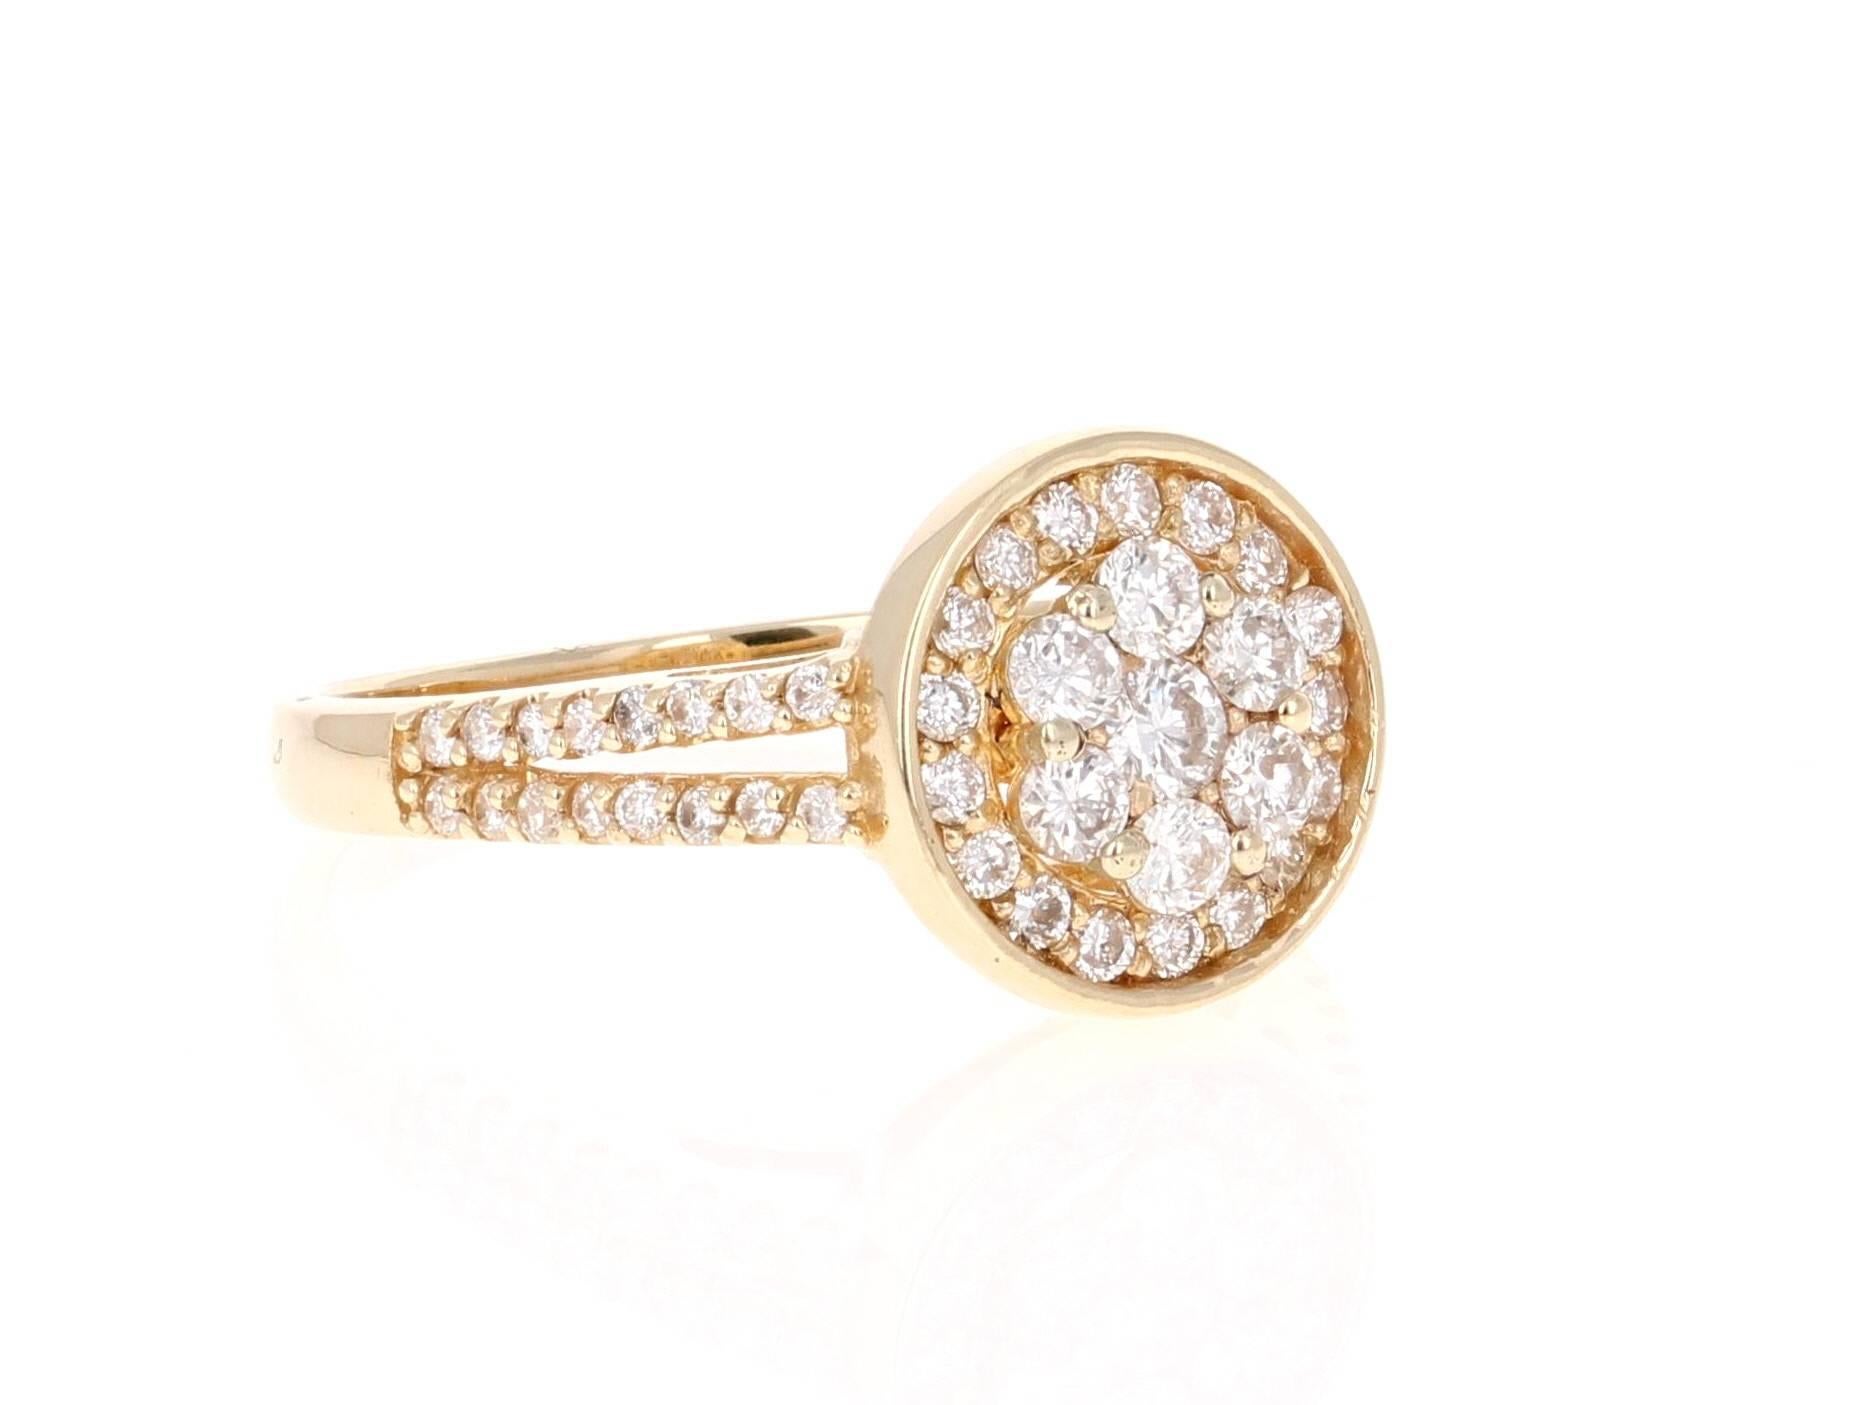 Diamond Yellow Gold Cluster Ring

A cute and dainty cocktail ring that is sure to be a great addition to your jewelry collection.
It has 56 Round Cut Diamonds that weigh a total of 0.68 Carats. 
It is beautifully crafted in 14K Yellow Gold and